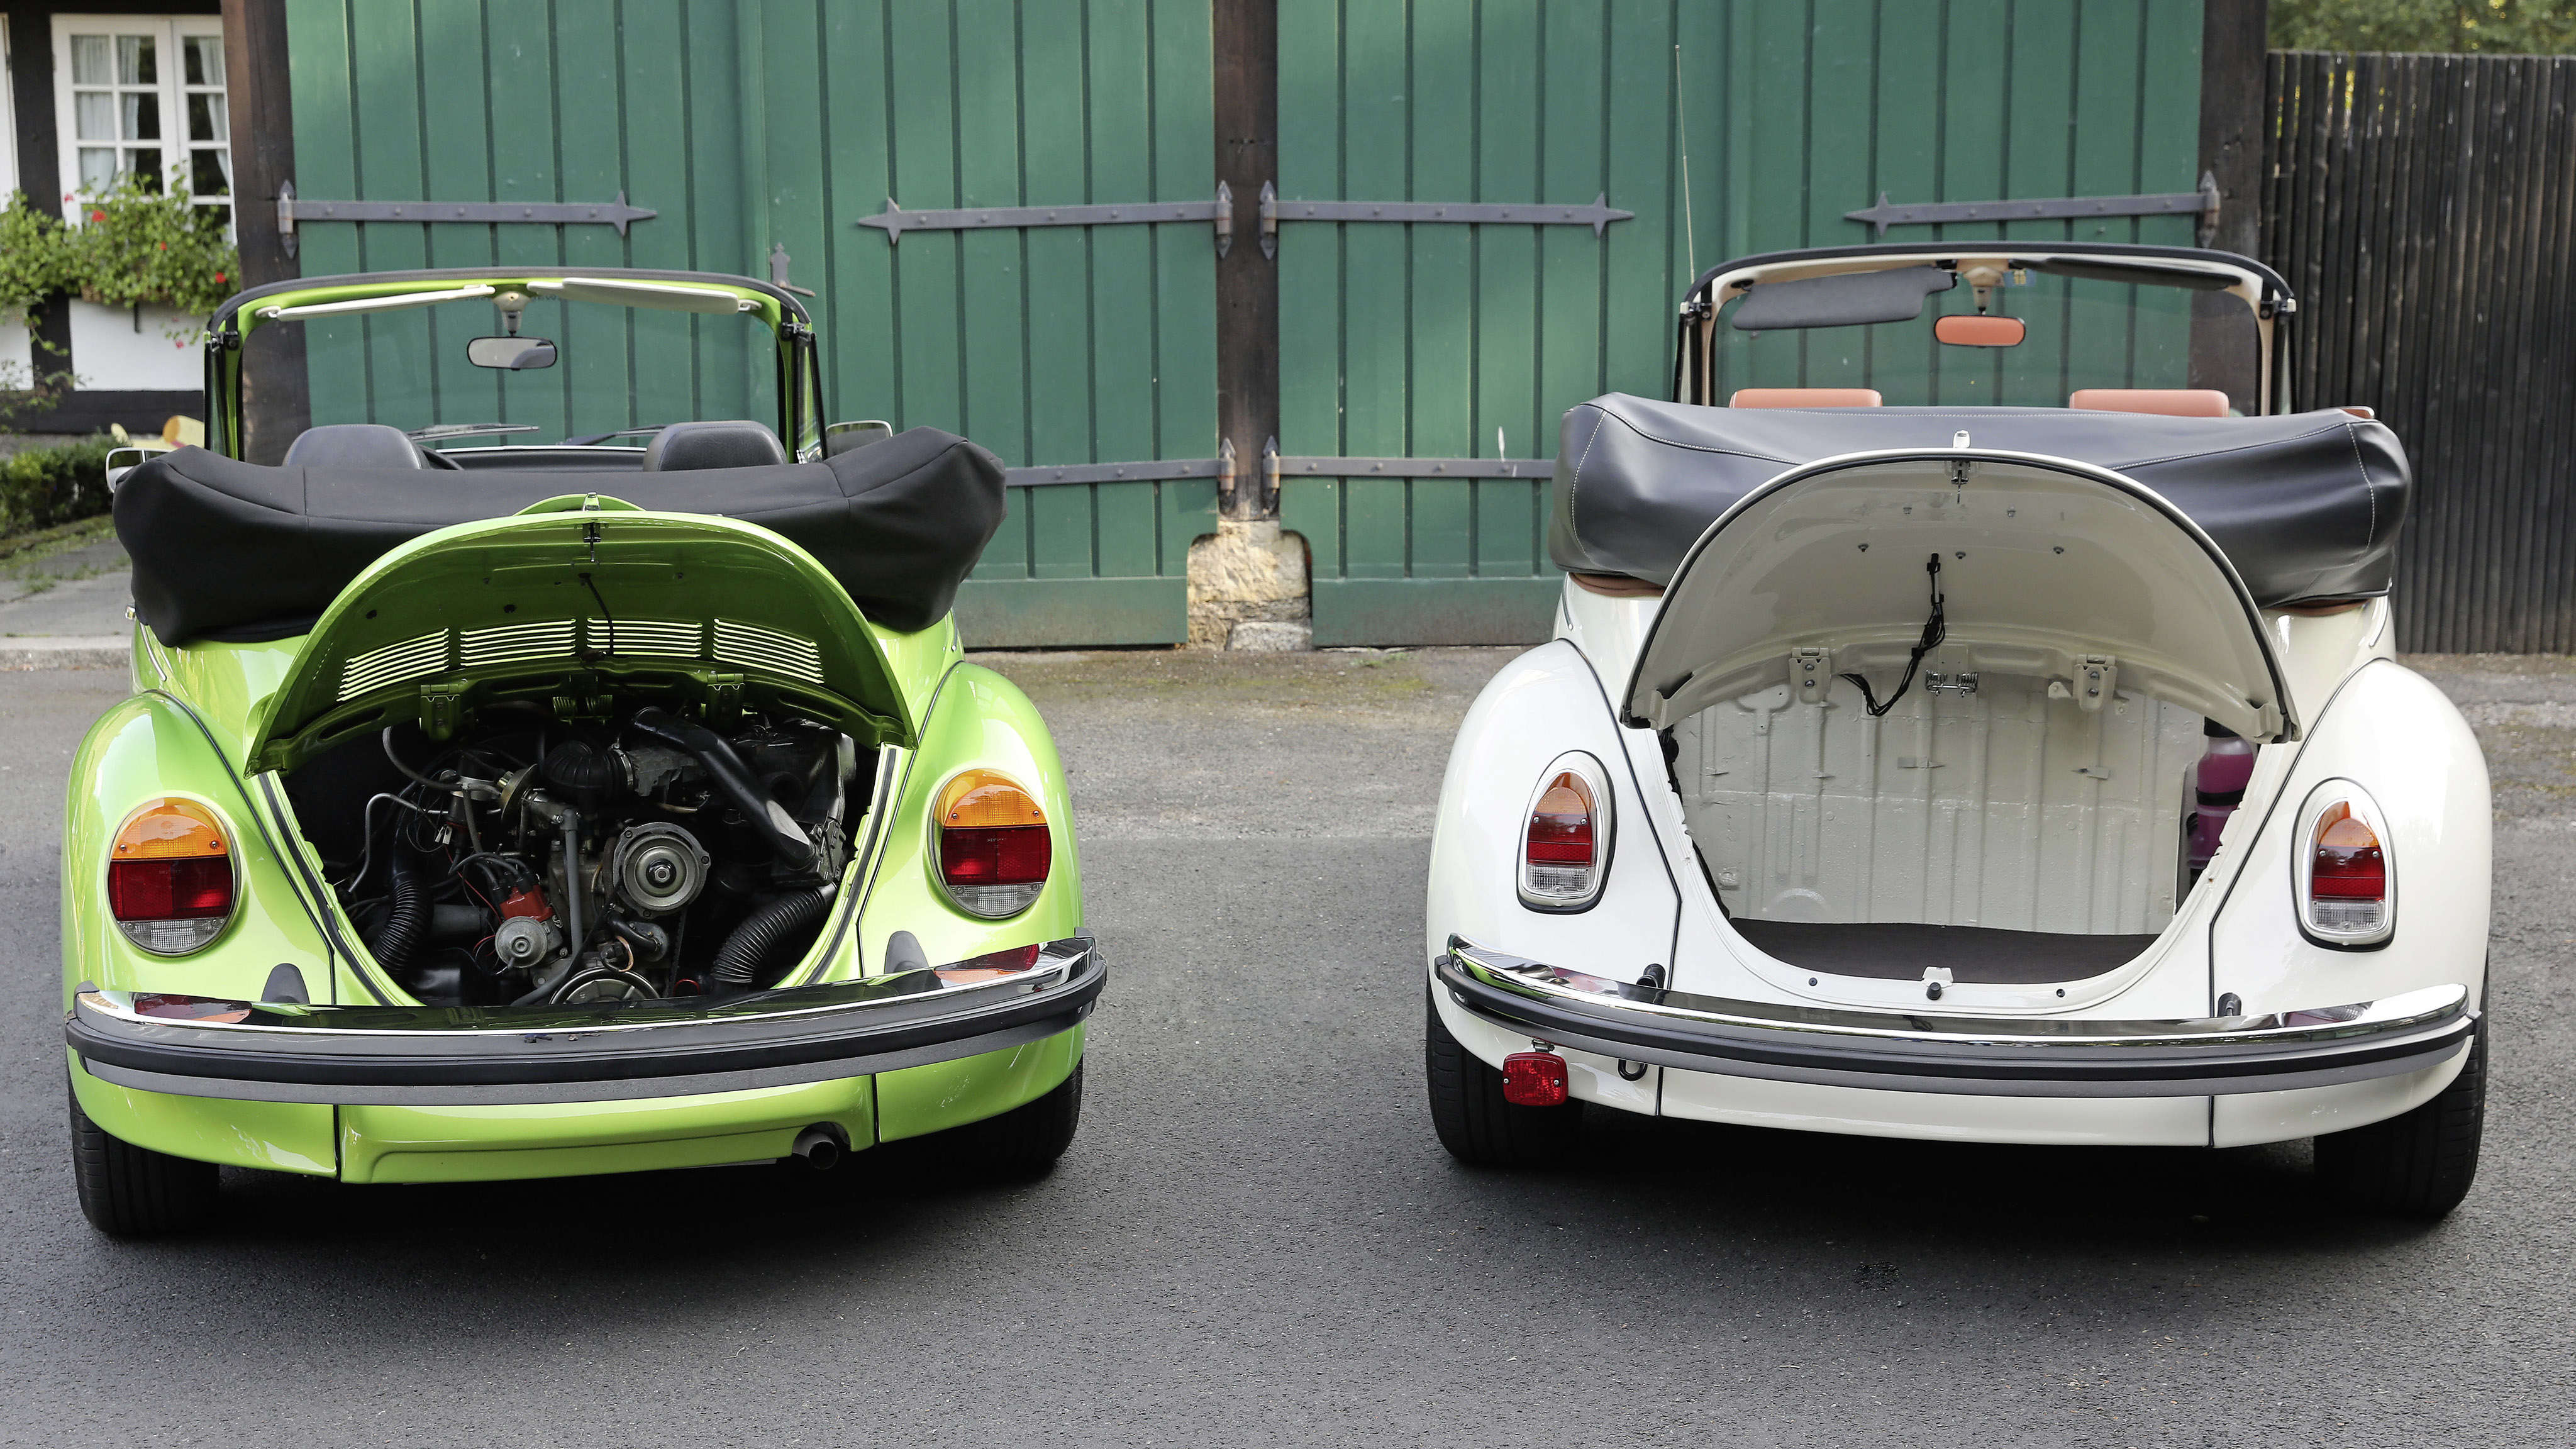 Volkswagen Wants To Make Its Beetle Into An e-Beetle